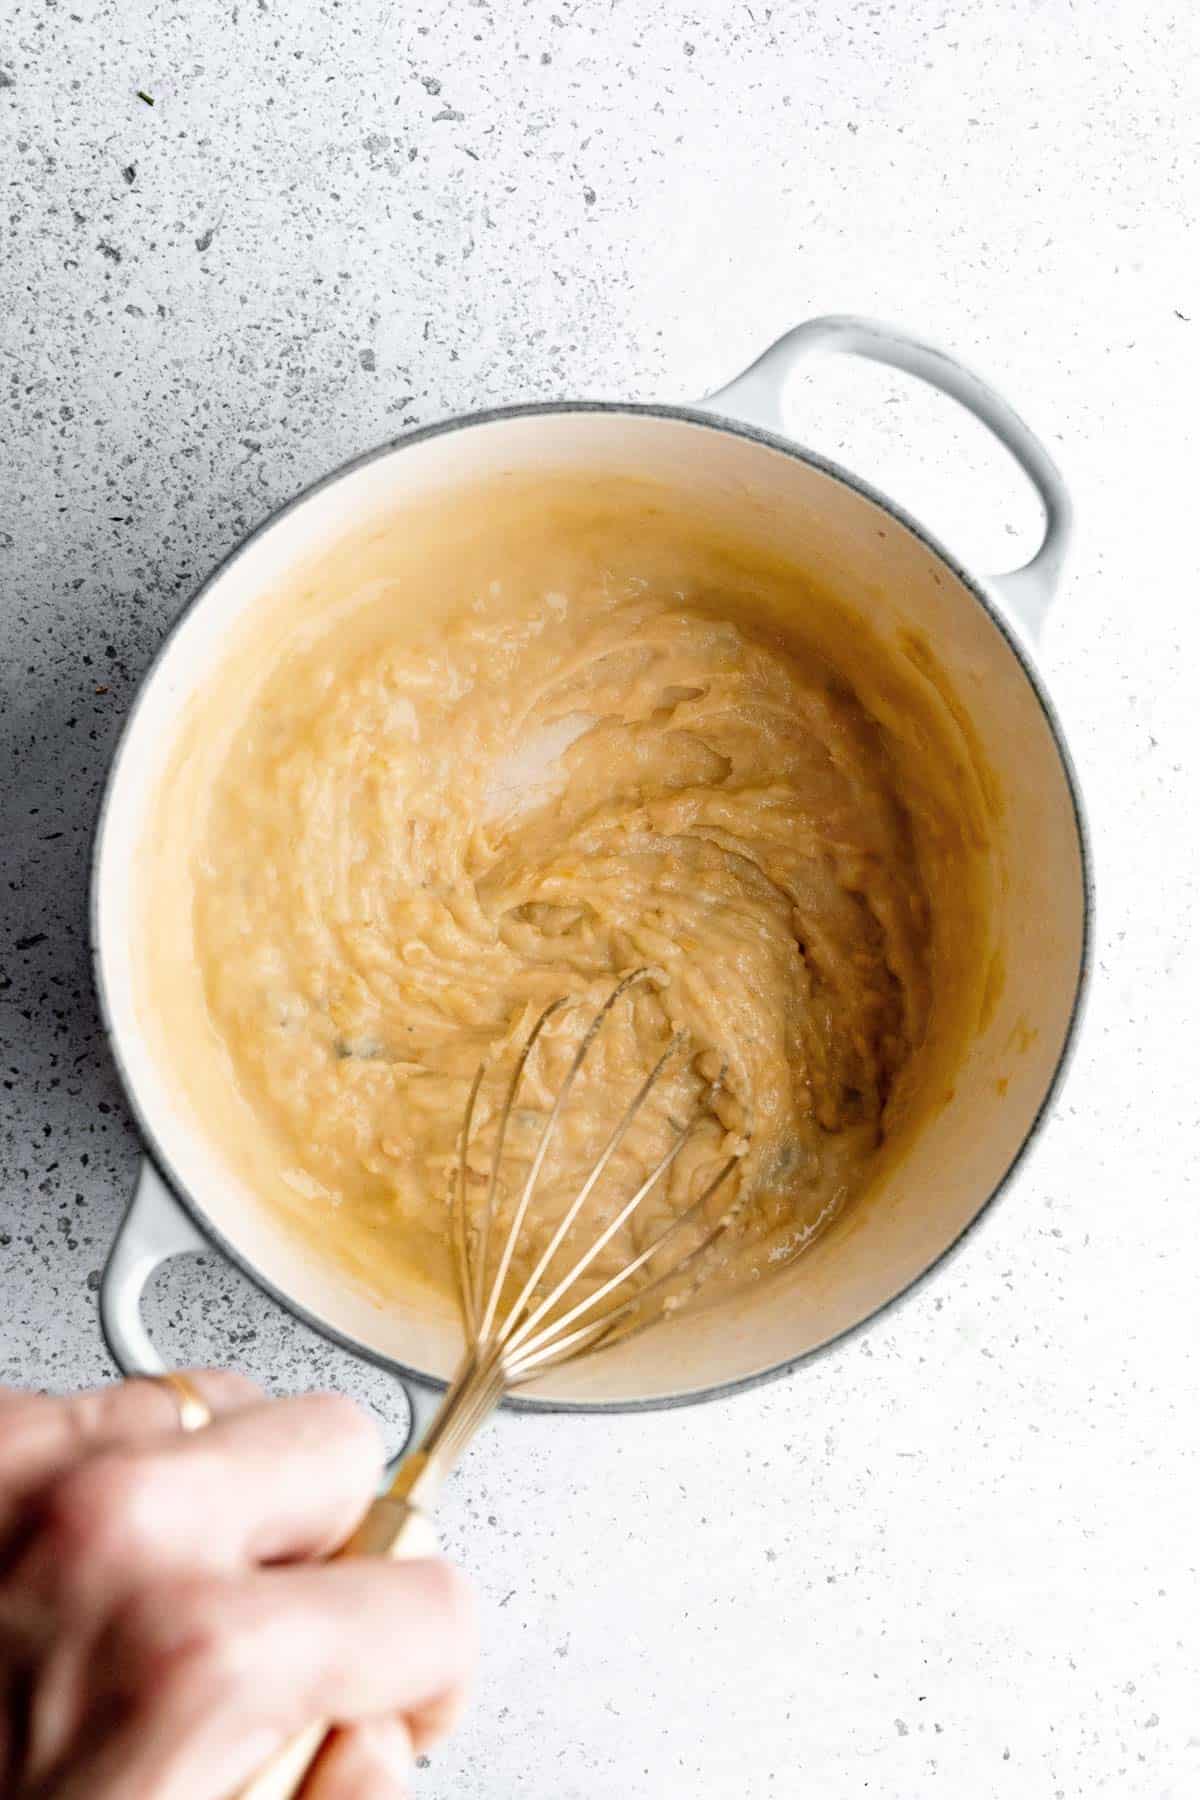 Hand whisking the roux.